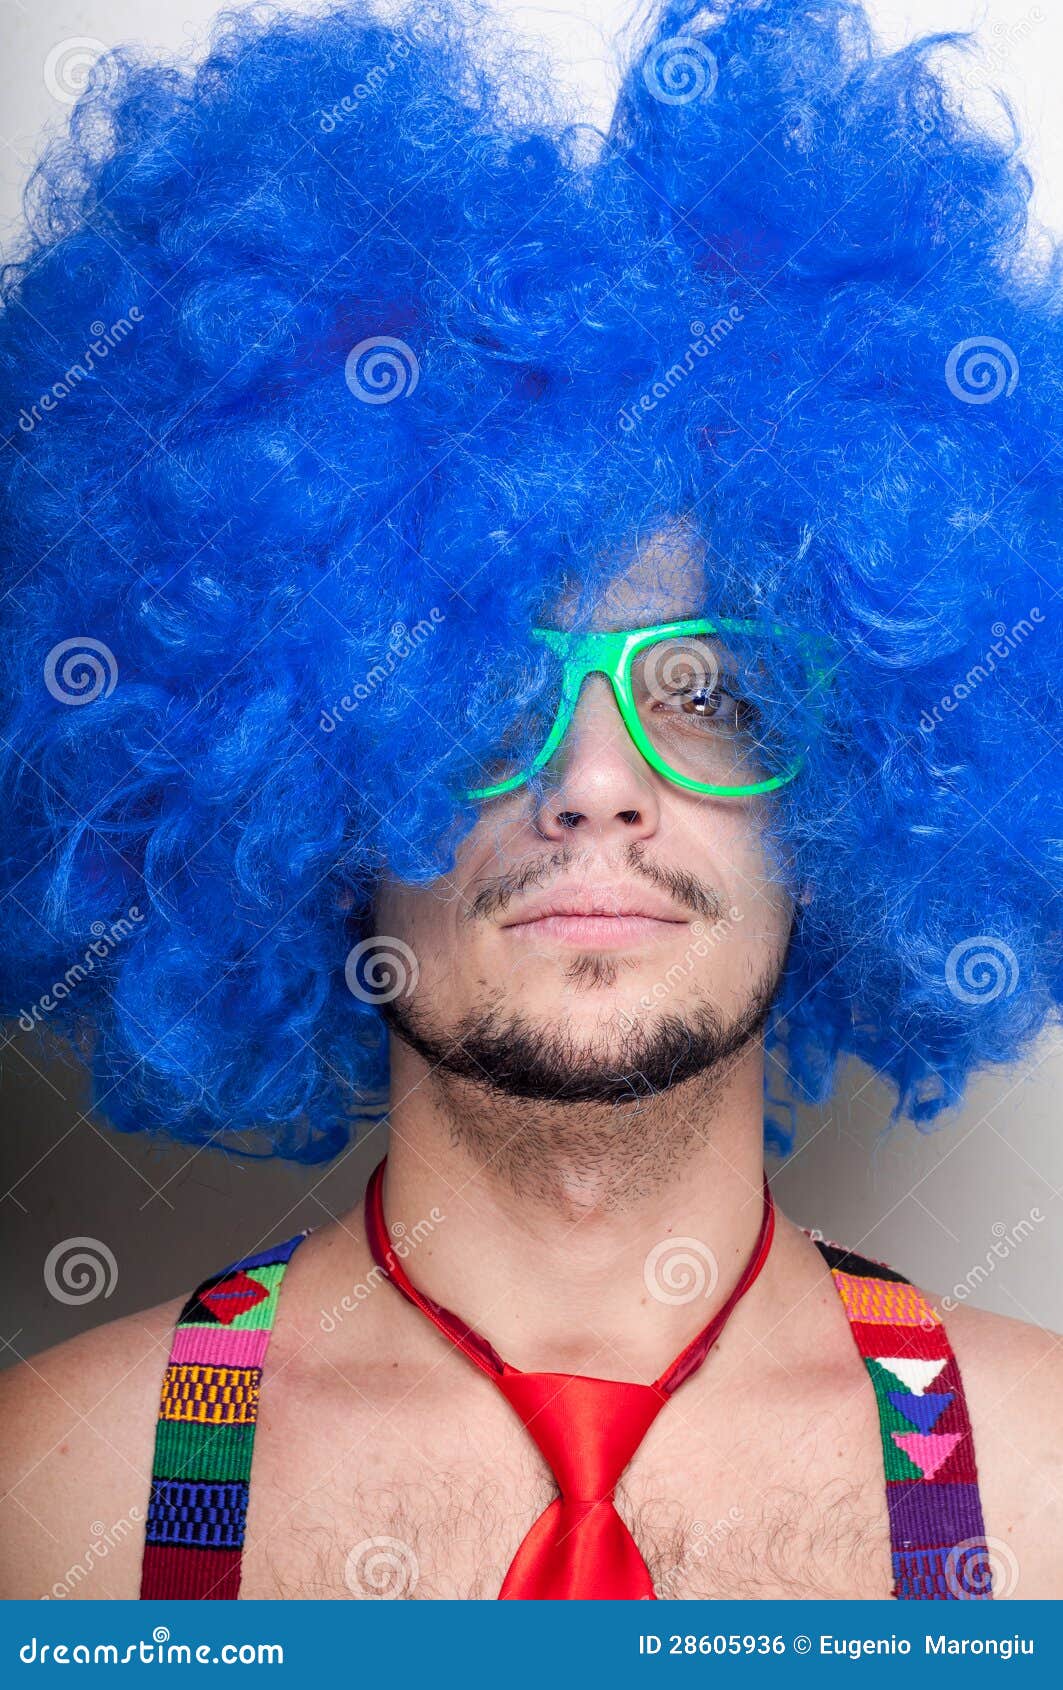 Funny Guy Naked With Blue Wig And Red Tie Royalty Free 